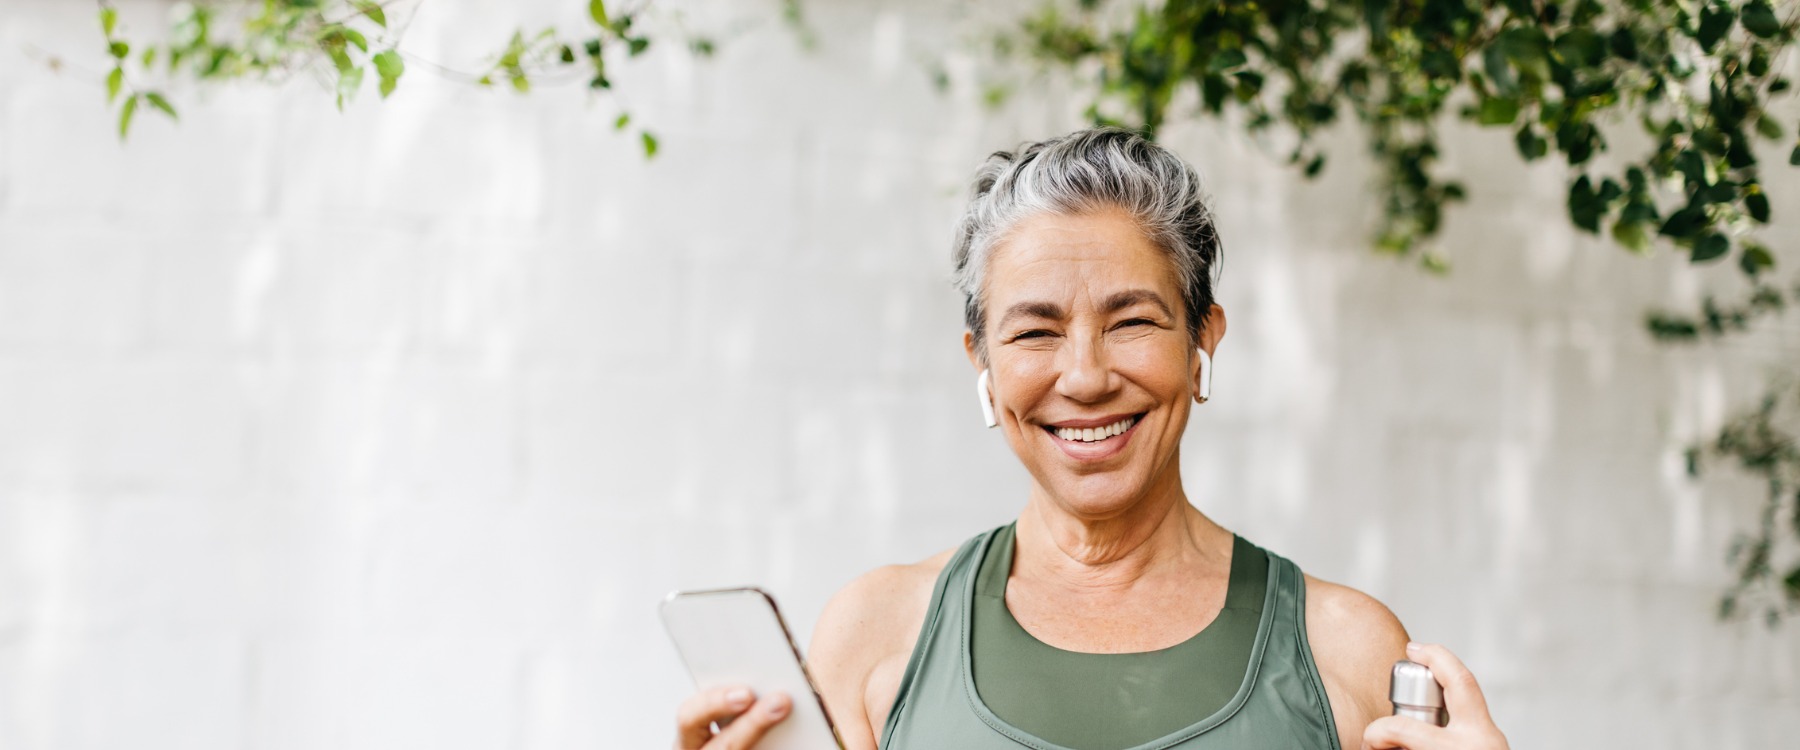 Happy senior woman with phone in hand